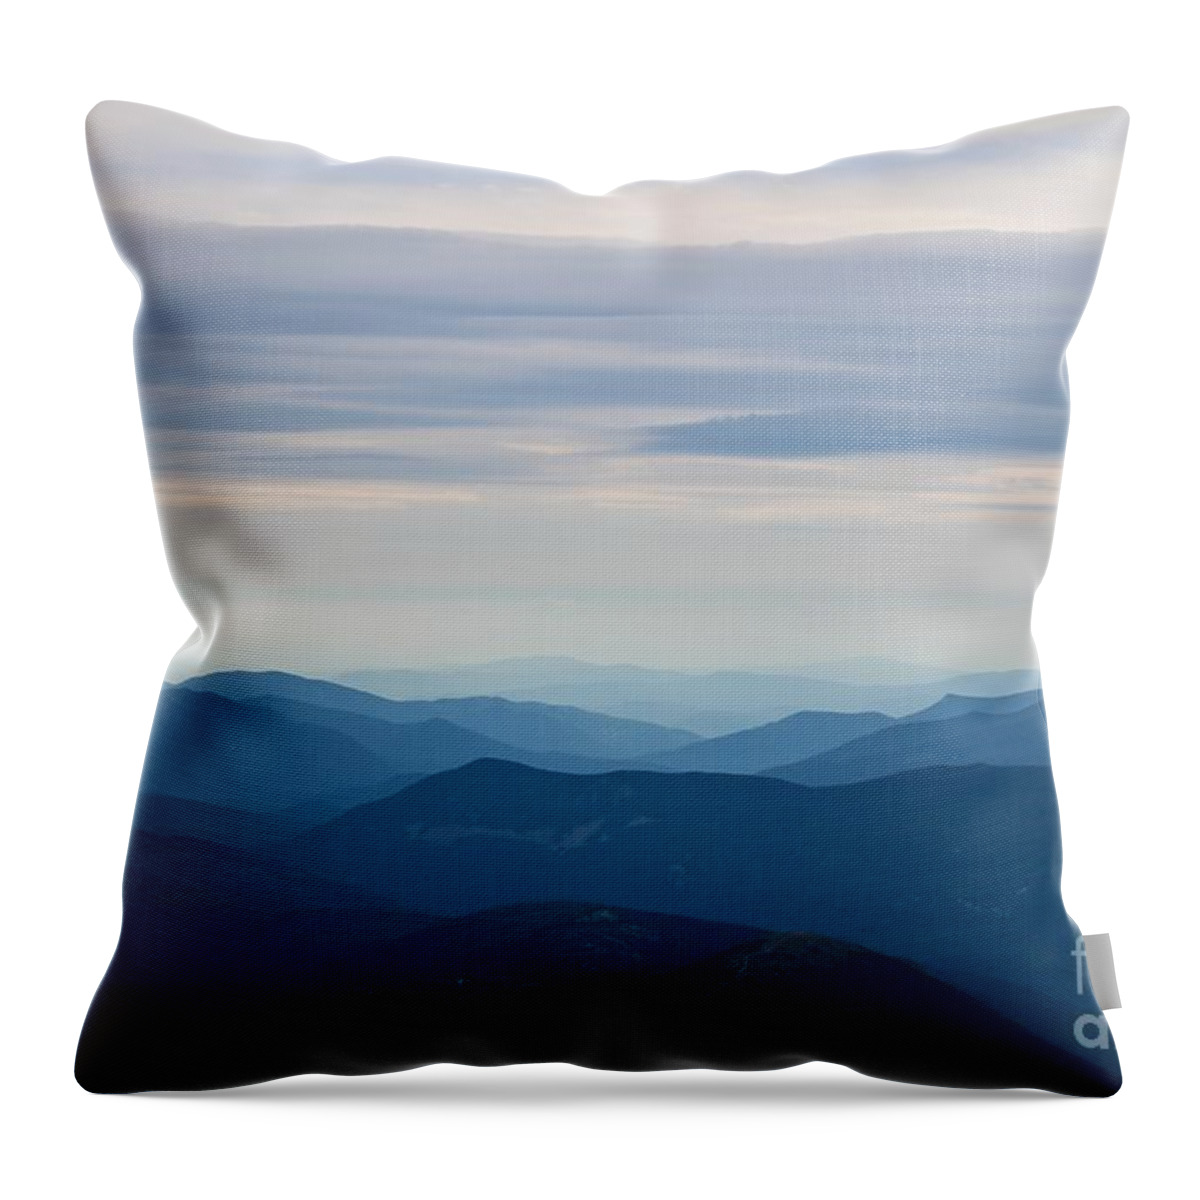 Mt. Washington Throw Pillow featuring the photograph Mt. Washington by Deena Withycombe